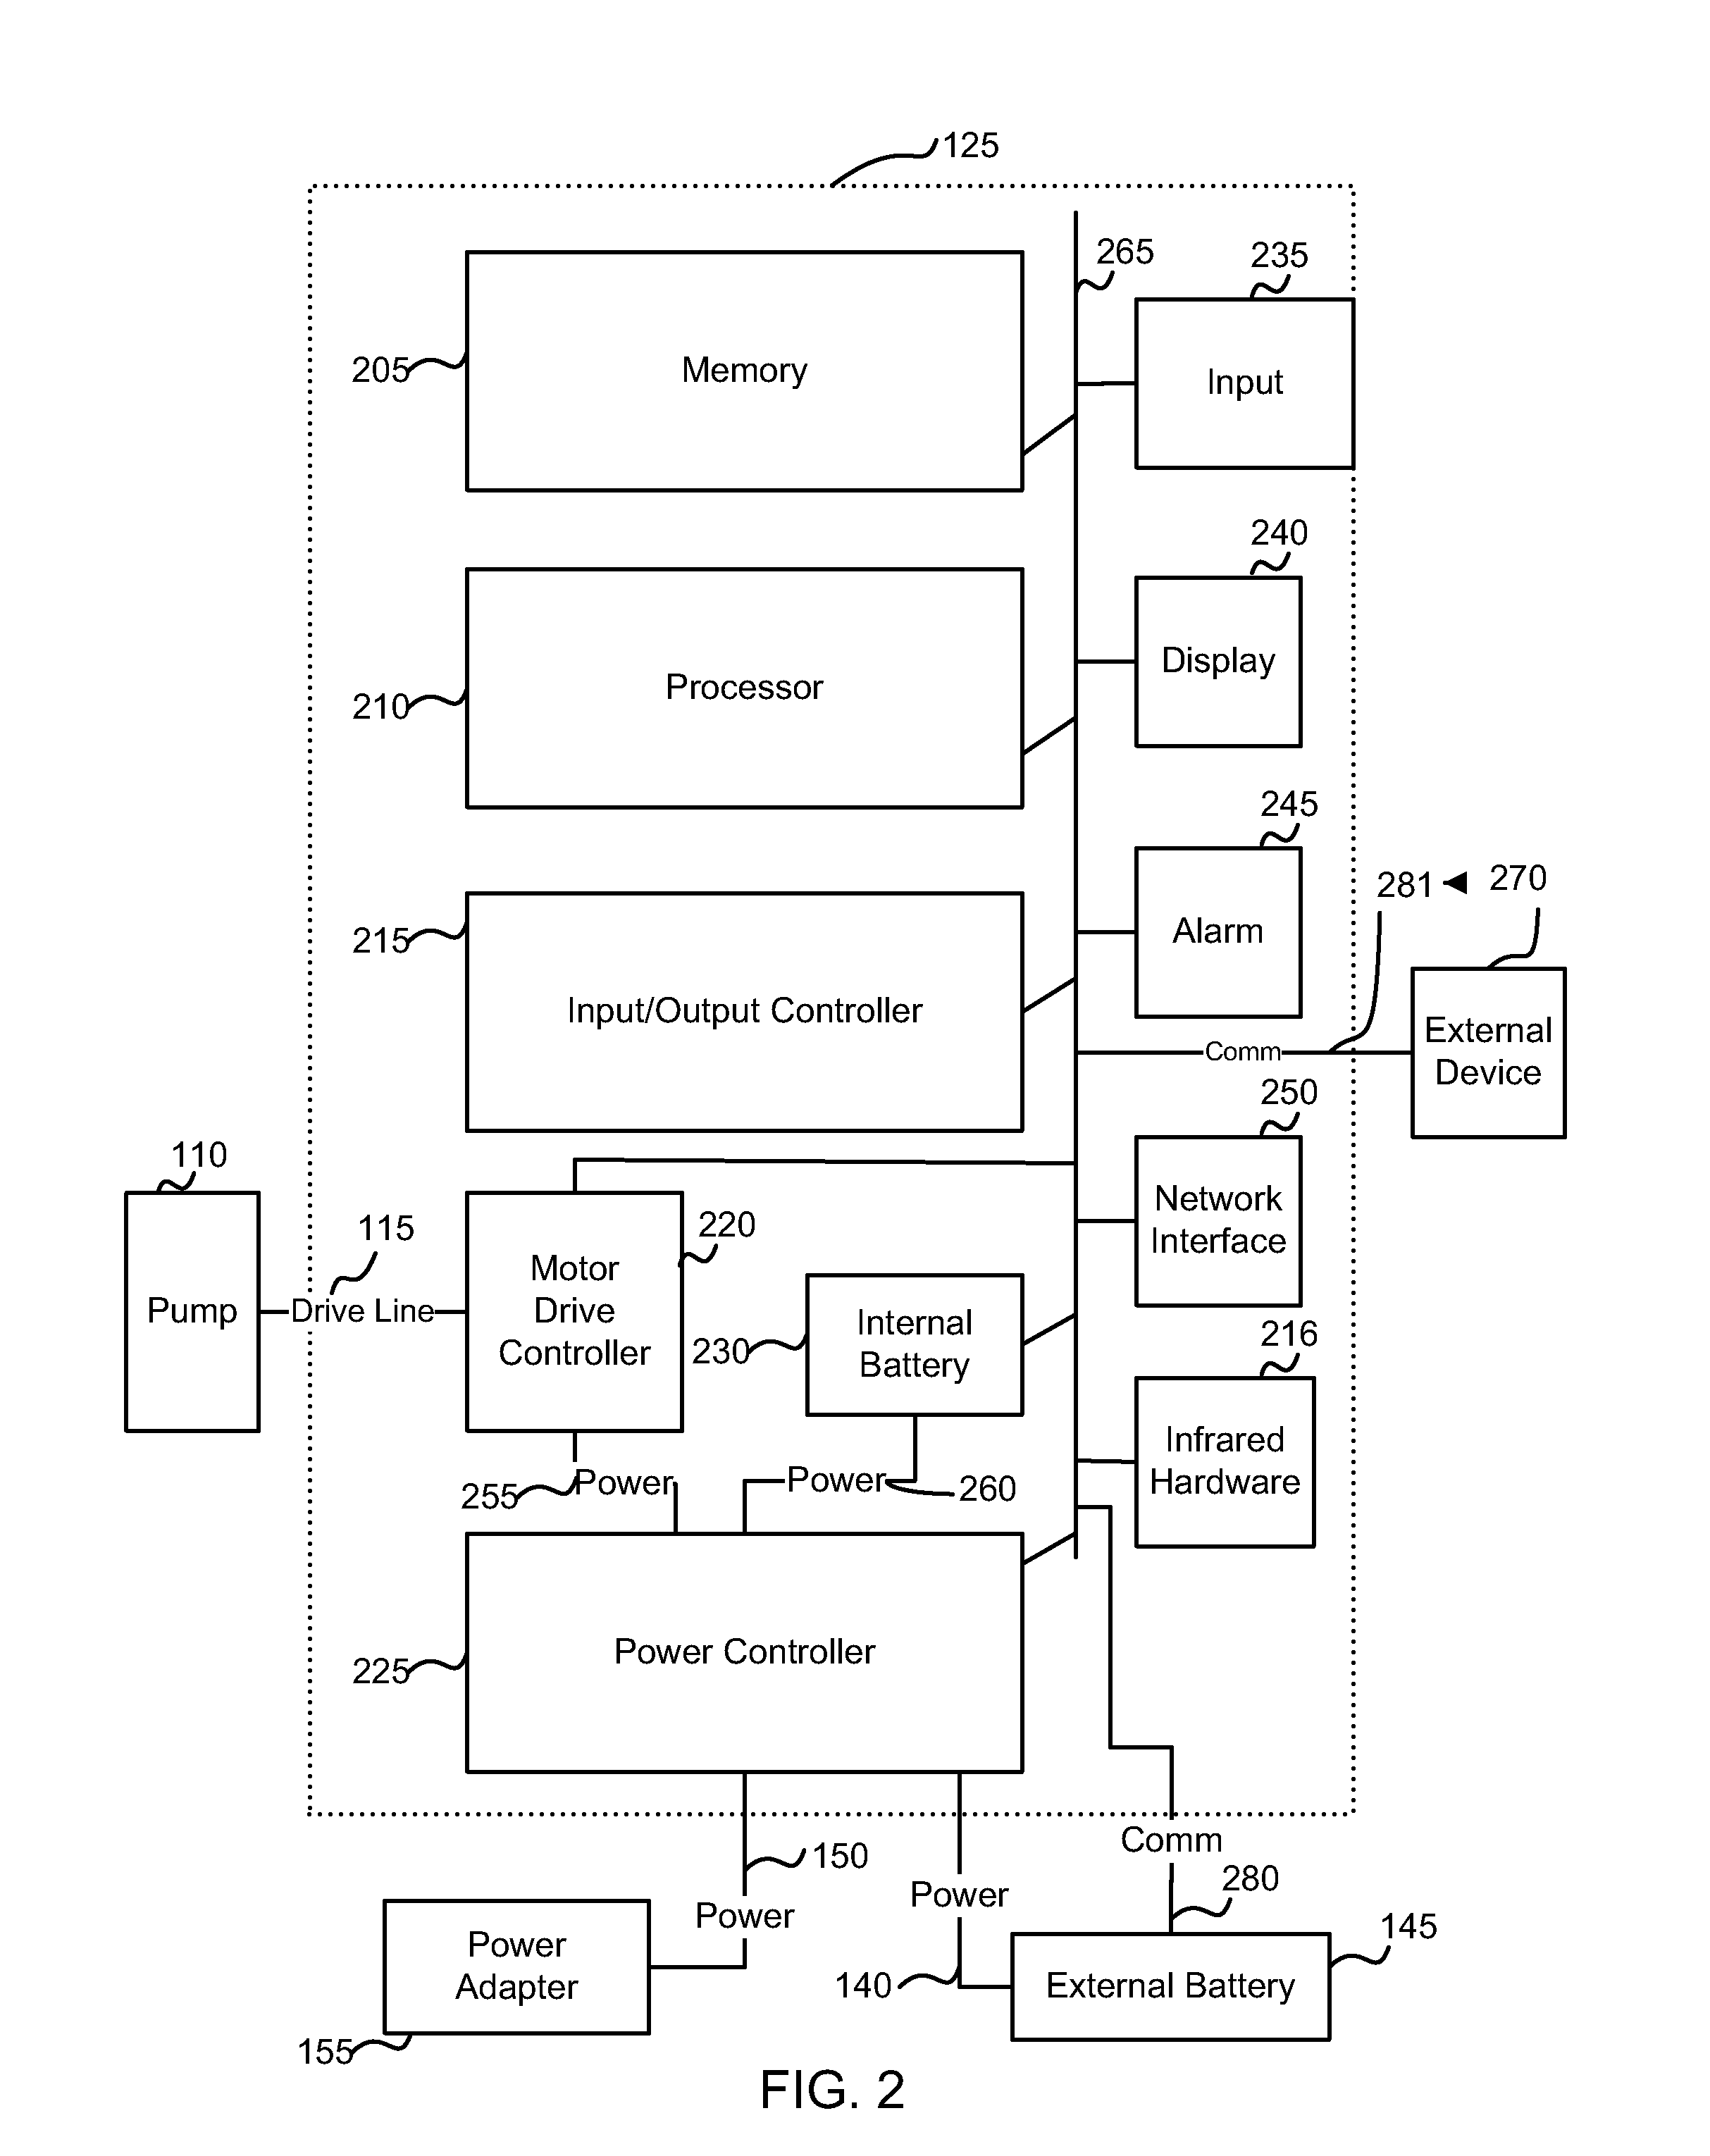 Touch screen interface and infrared communication system integrated into a battery